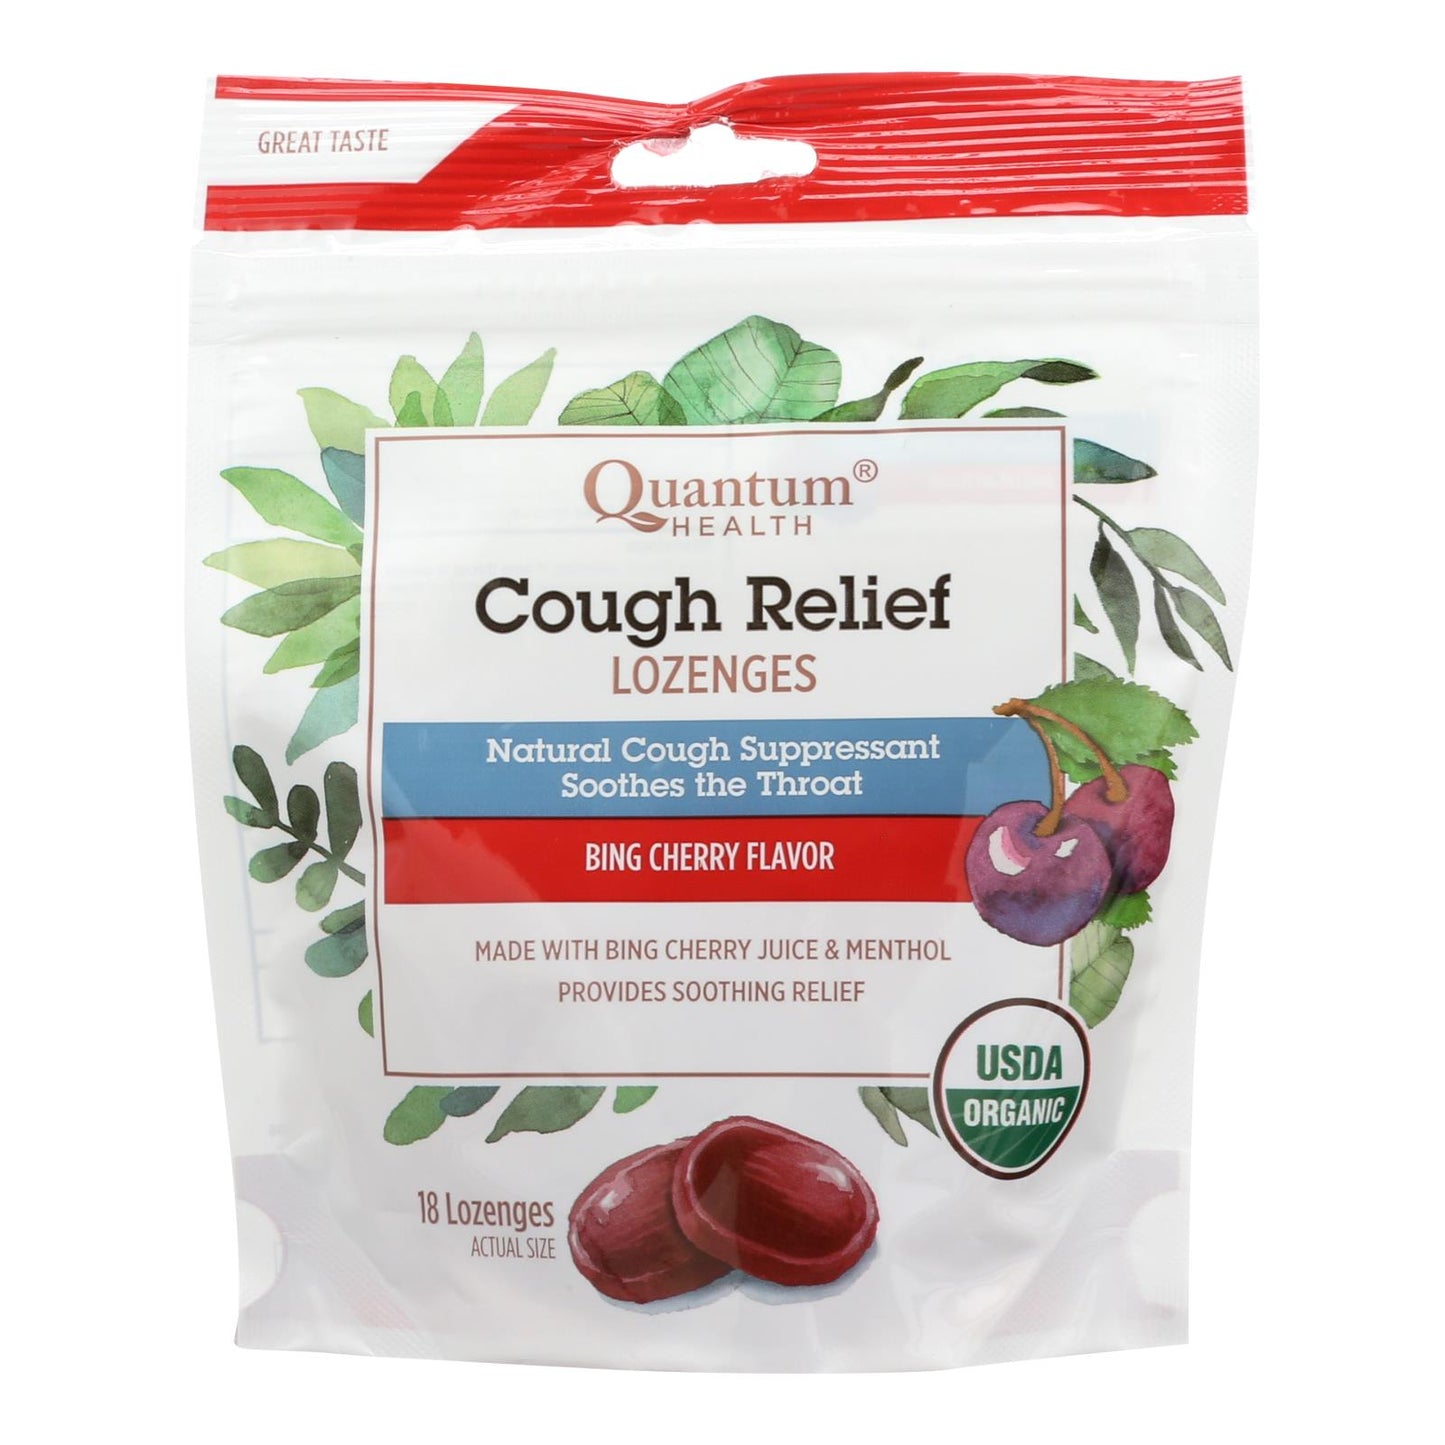 Quantum Research Organic Cough Relief Lozenges - Bing Cherry - 18 Count